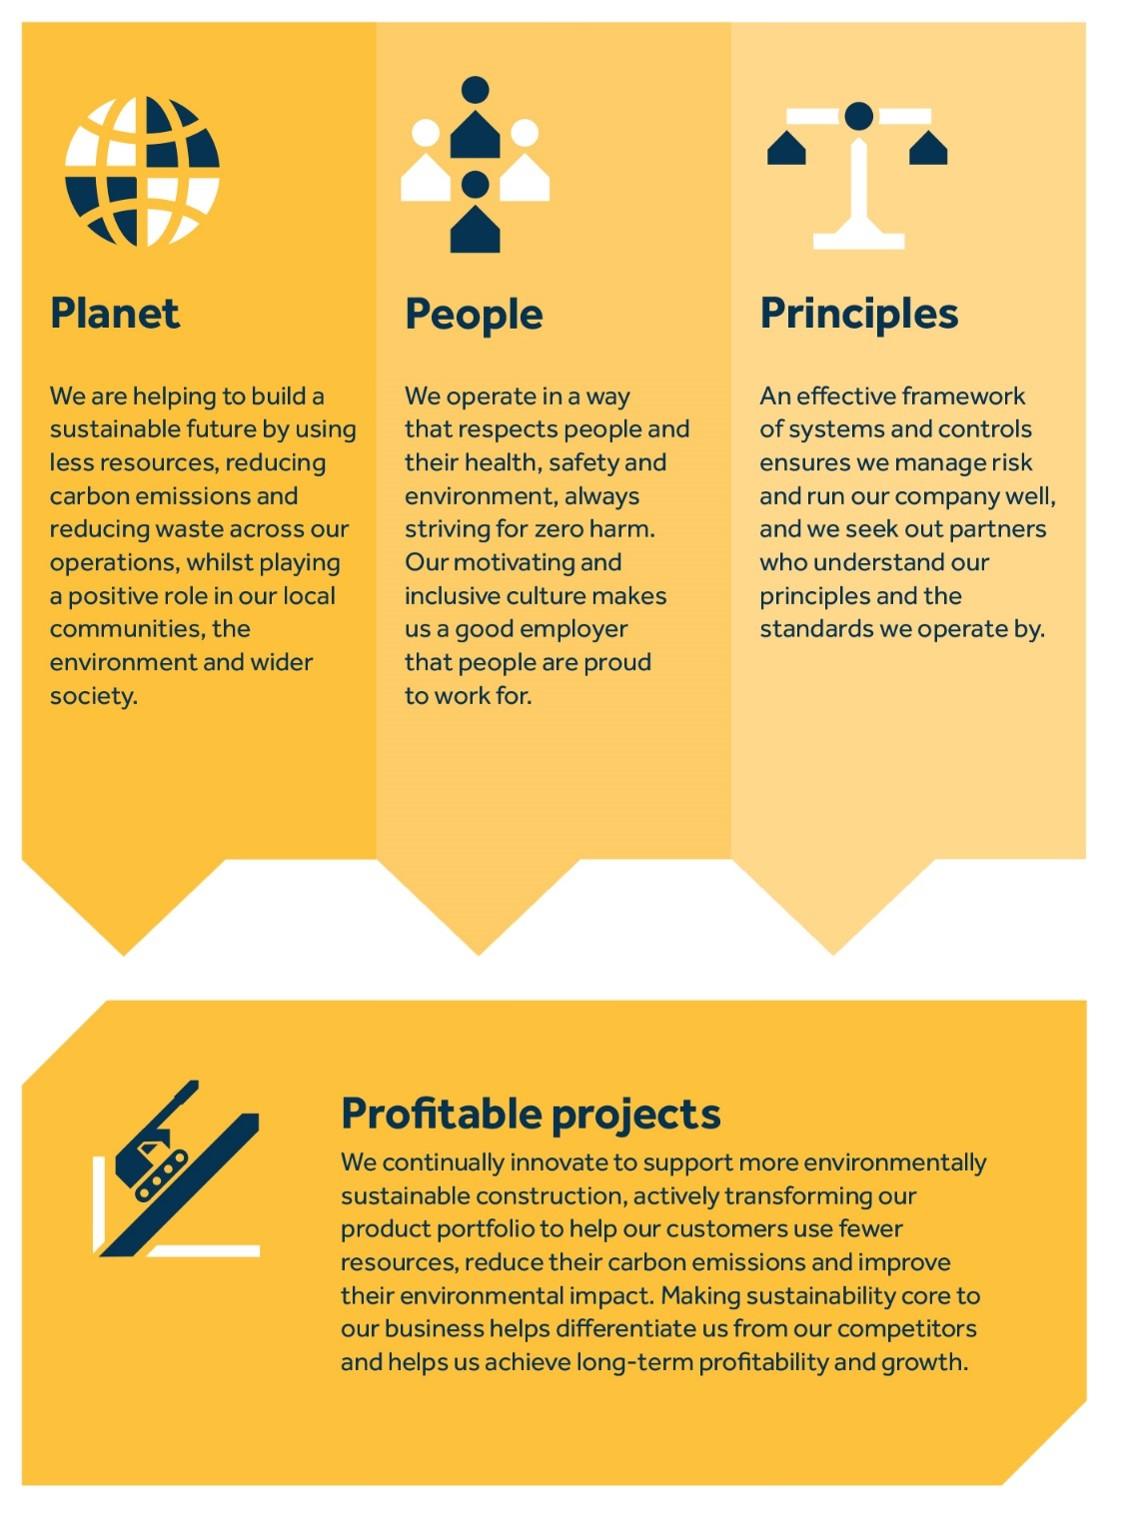 Keller's four Ps of sustainability